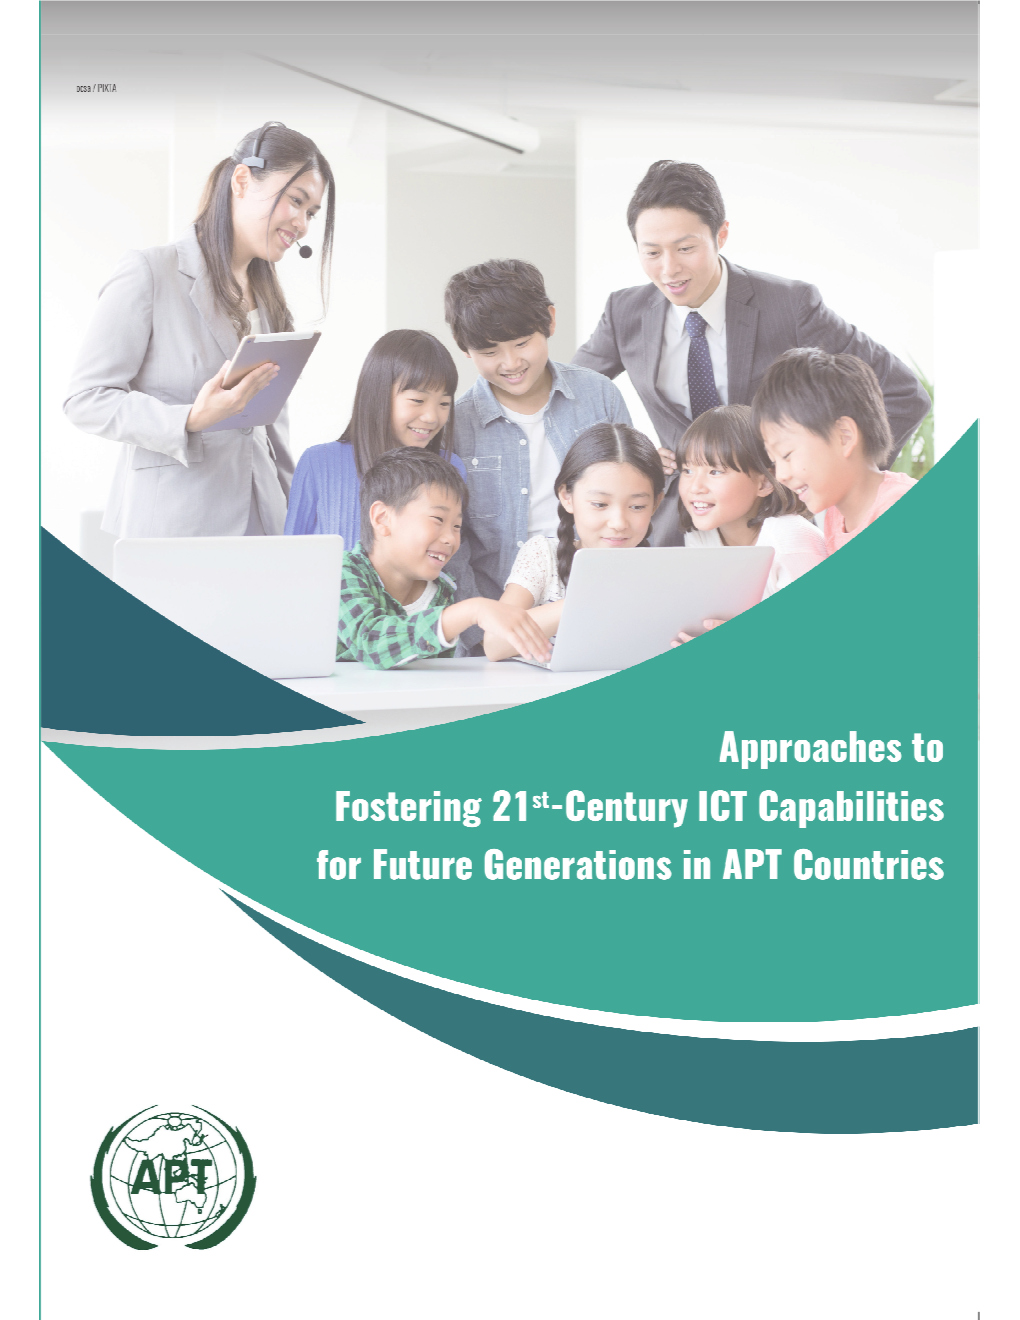 Approaches to Fostering 21St-Century ICT Capabilities for Future Generations in APT Countries